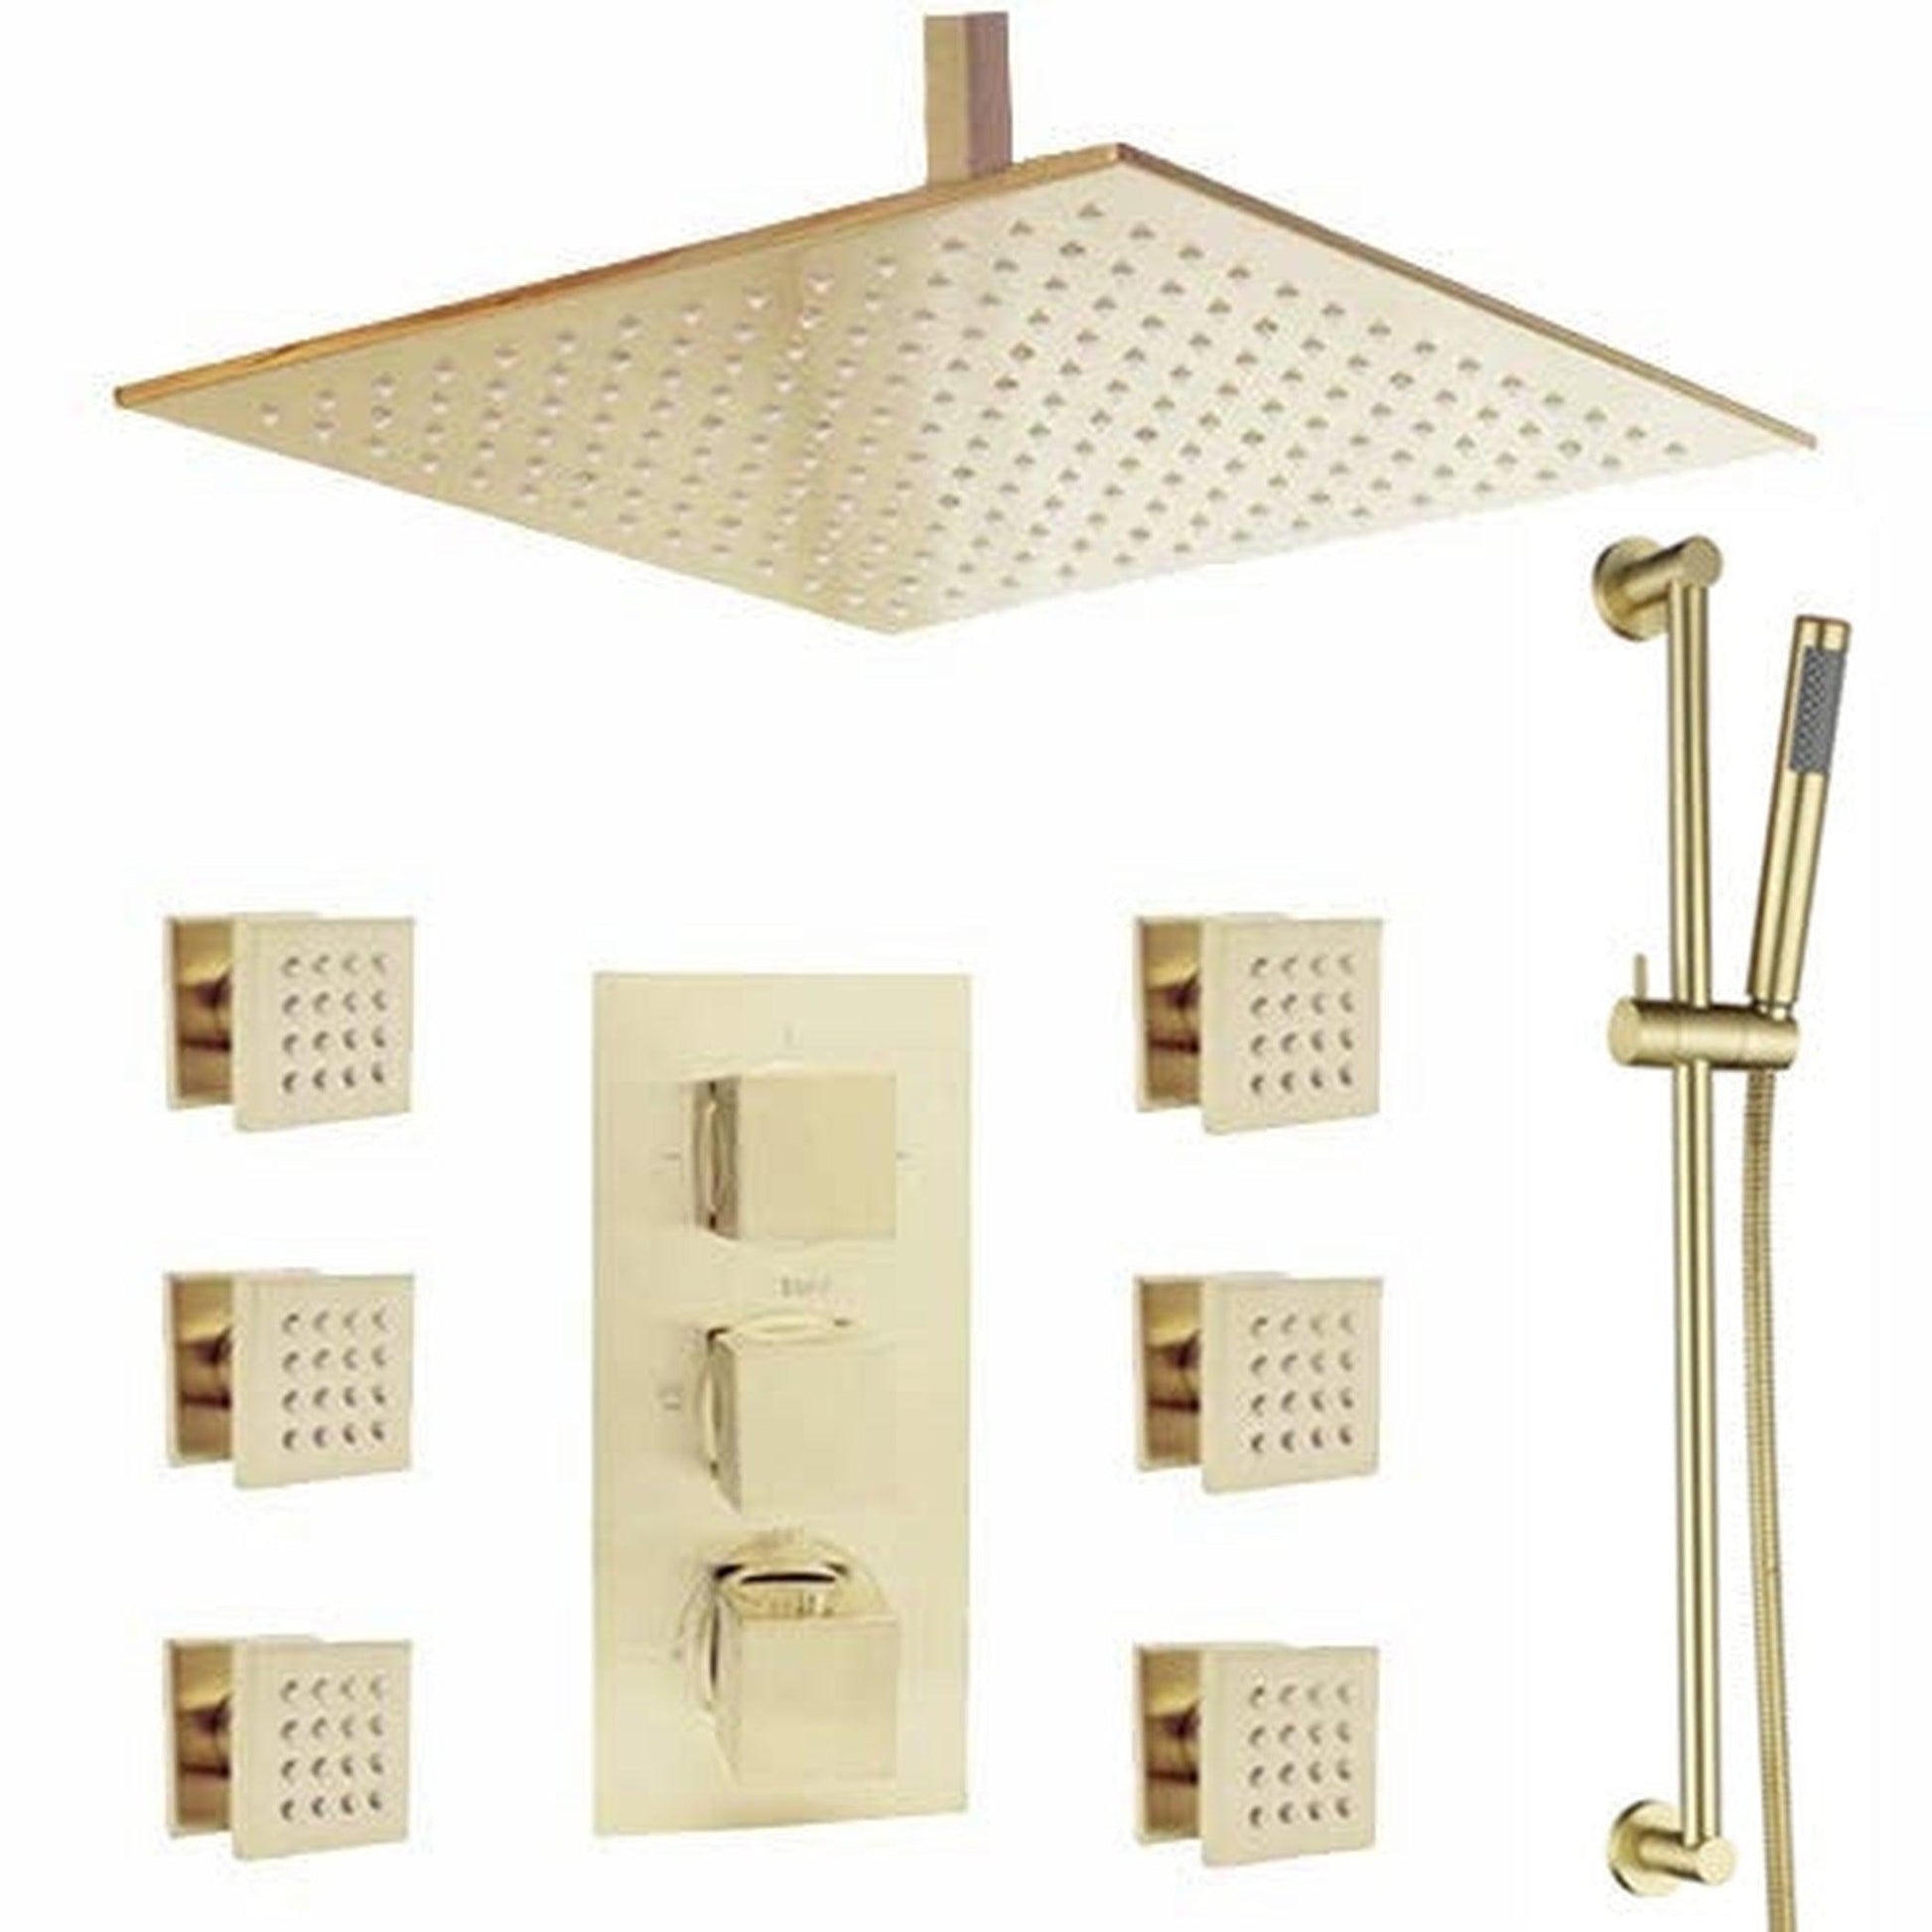 FontanaShowers Verona Creative Luxury 10" Brushed Gold Square Ceiling Mounted Thermostatic Button Mixer Rainfall Shower System With 6-Jet Body Sprays and Hand Shower